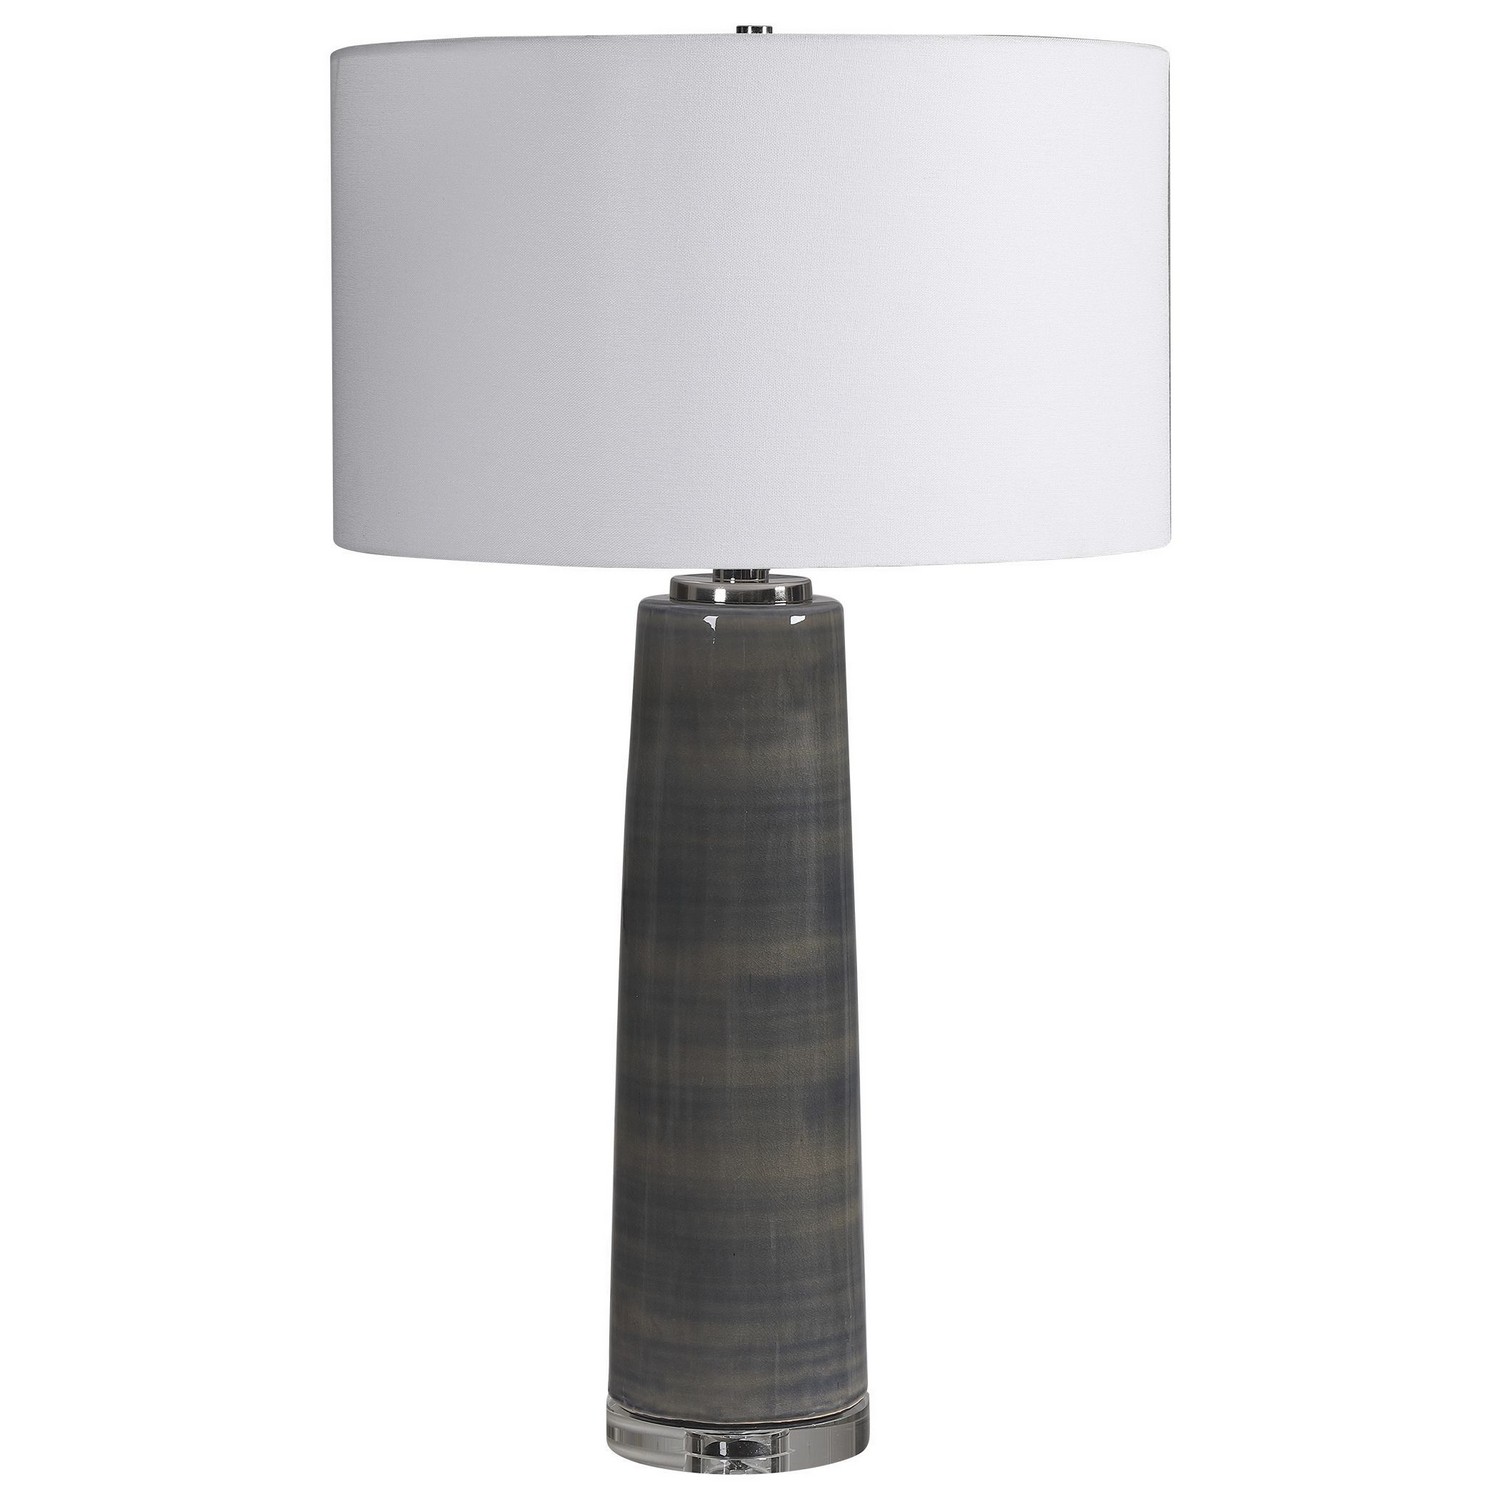 Uttermost Seurat Table Lamp - Charcoal